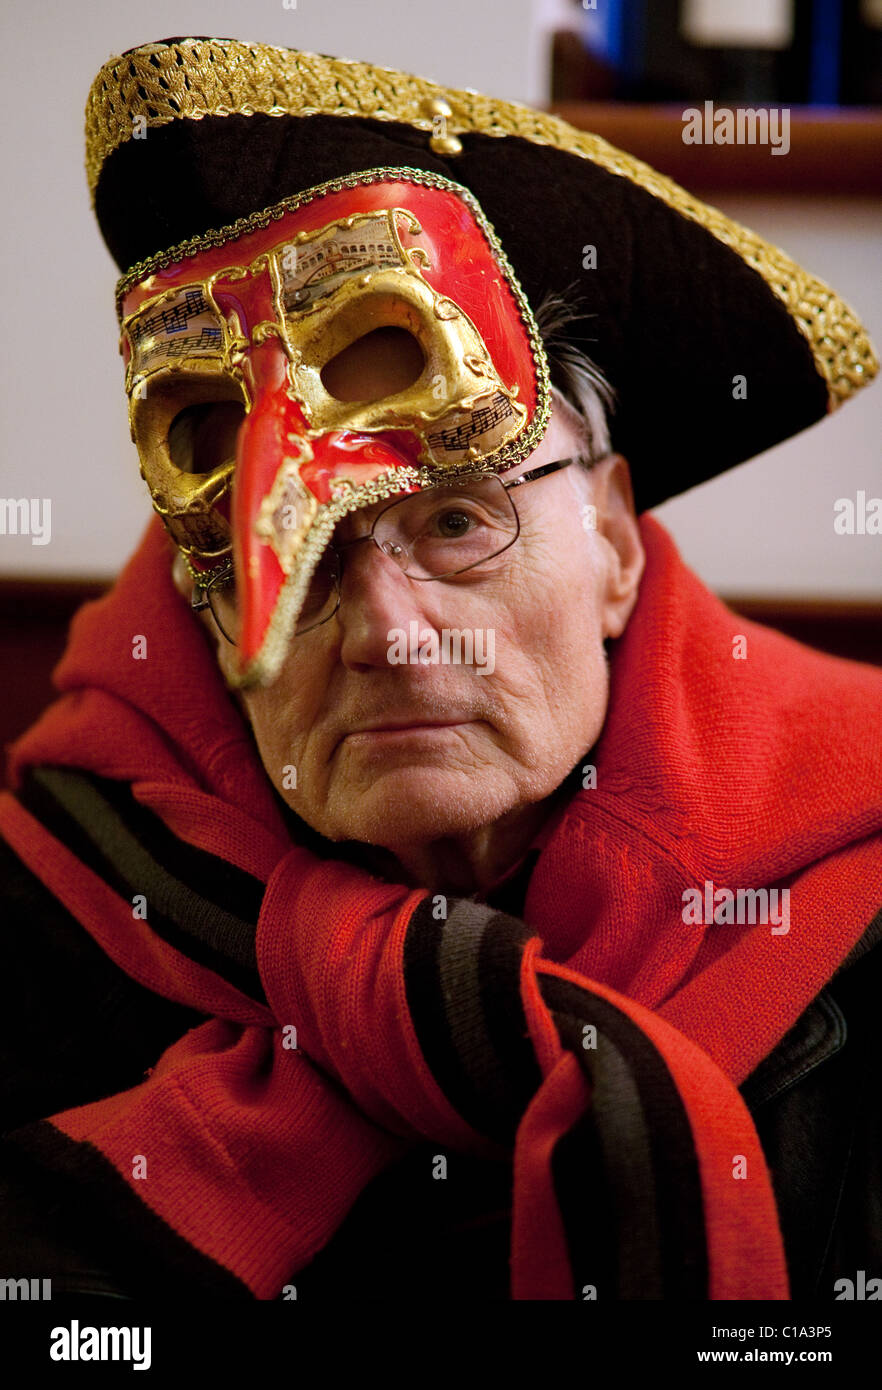 An elderly man in carnival costume and mask, the Venice carnival, Venice, Italy Stock Photo